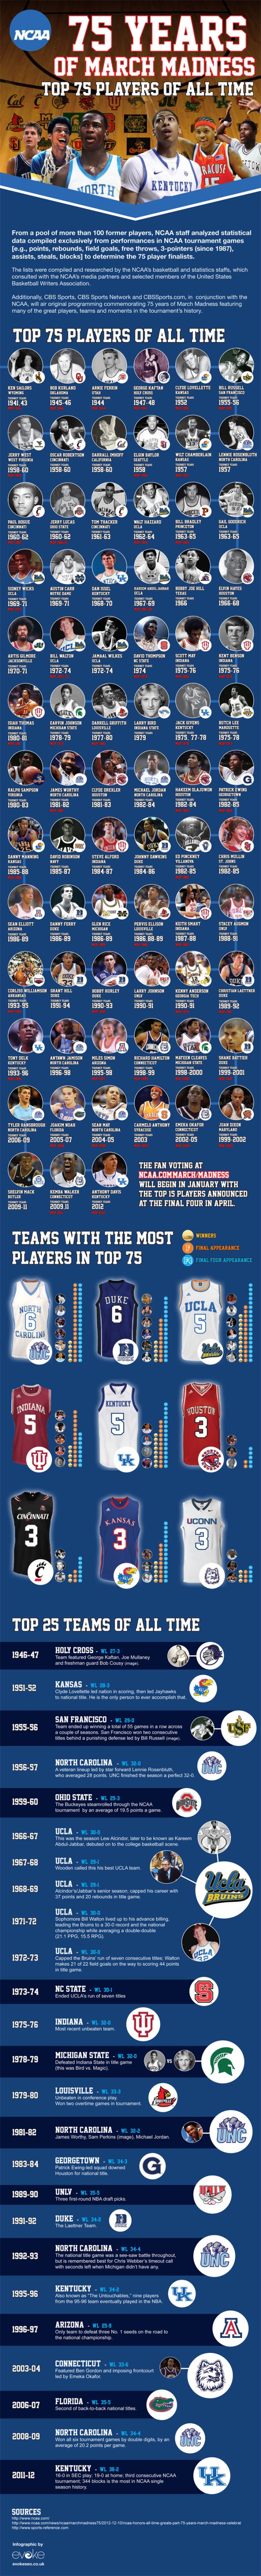 ncaa-75-years-of-march-madness-infographic--the-top-75-basketball-players-of-all-time